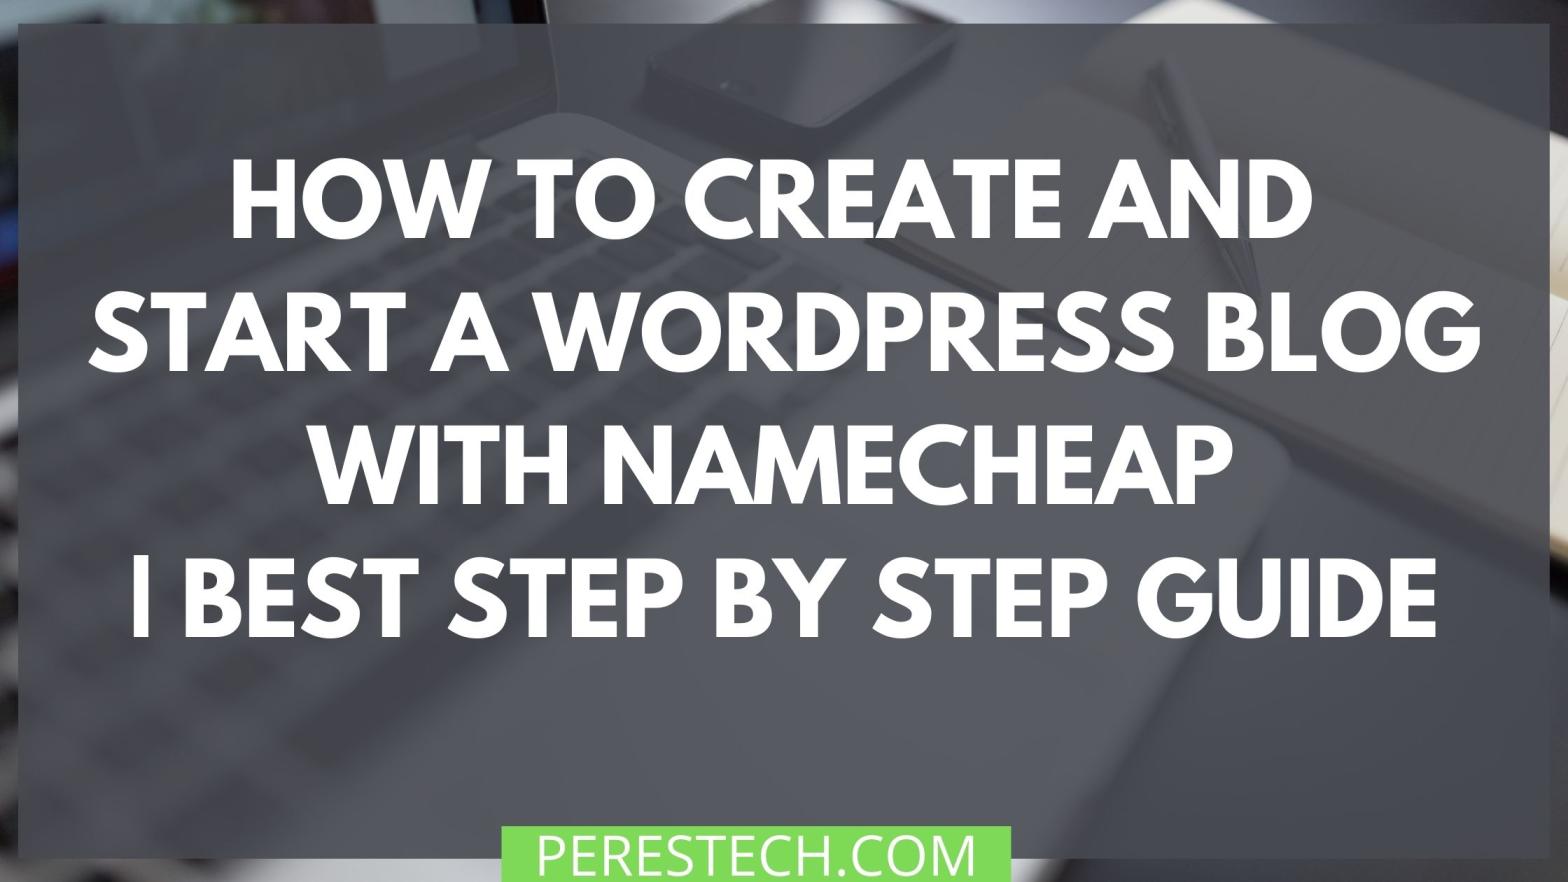 HOW TO CREATE and start a wordpress blog with namecheap